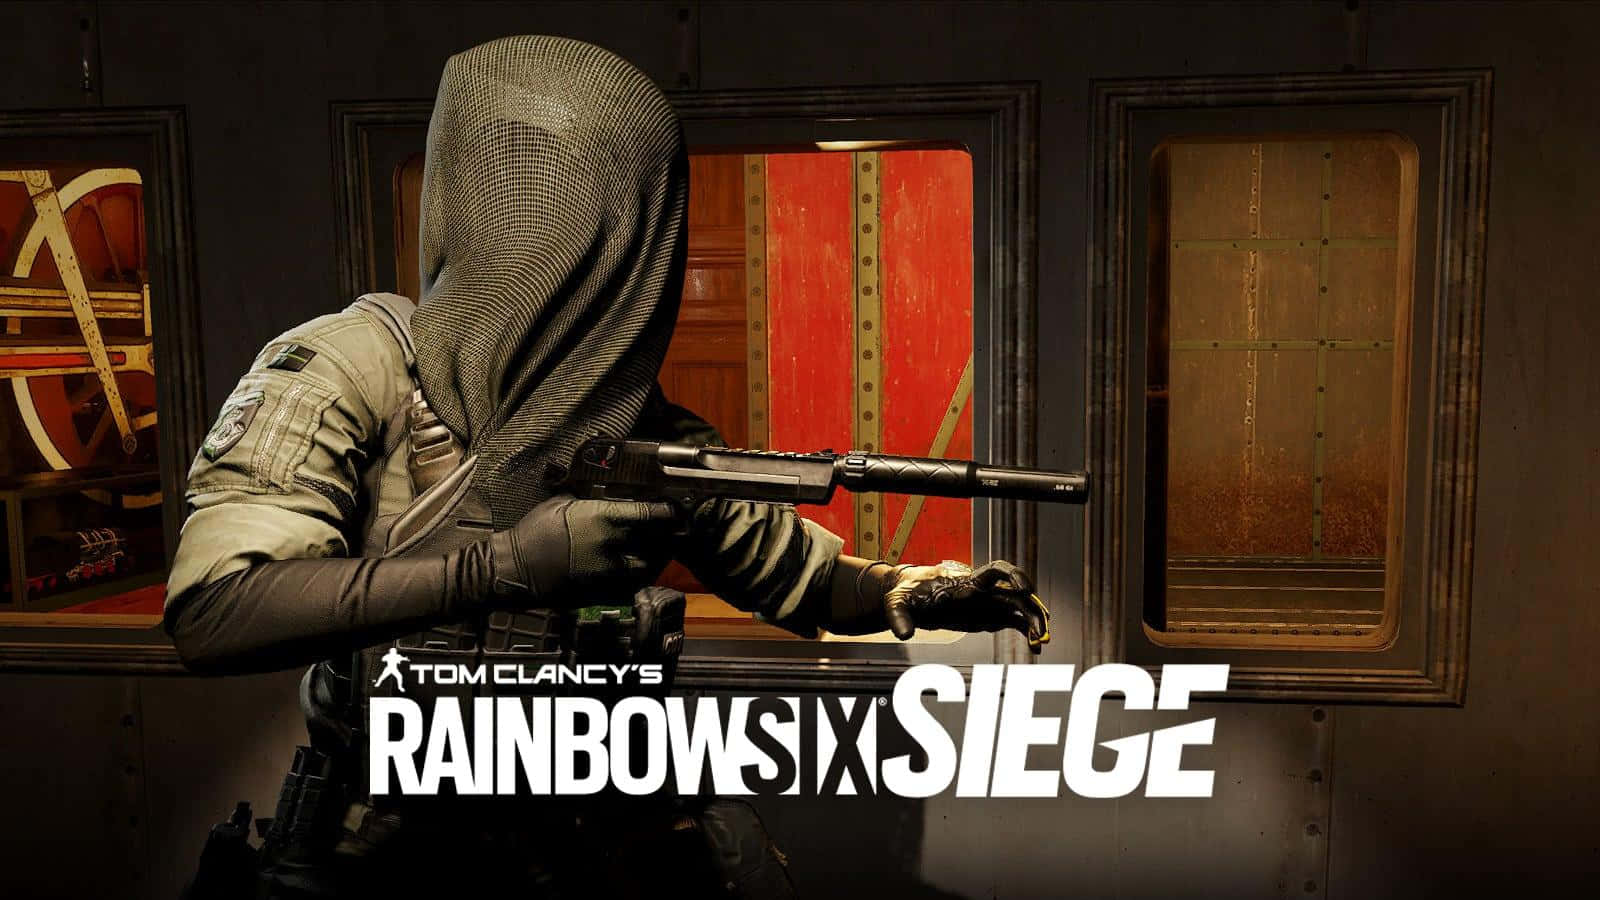 Intense action scene featuring Twitch from Rainbow Six Siege Wallpaper